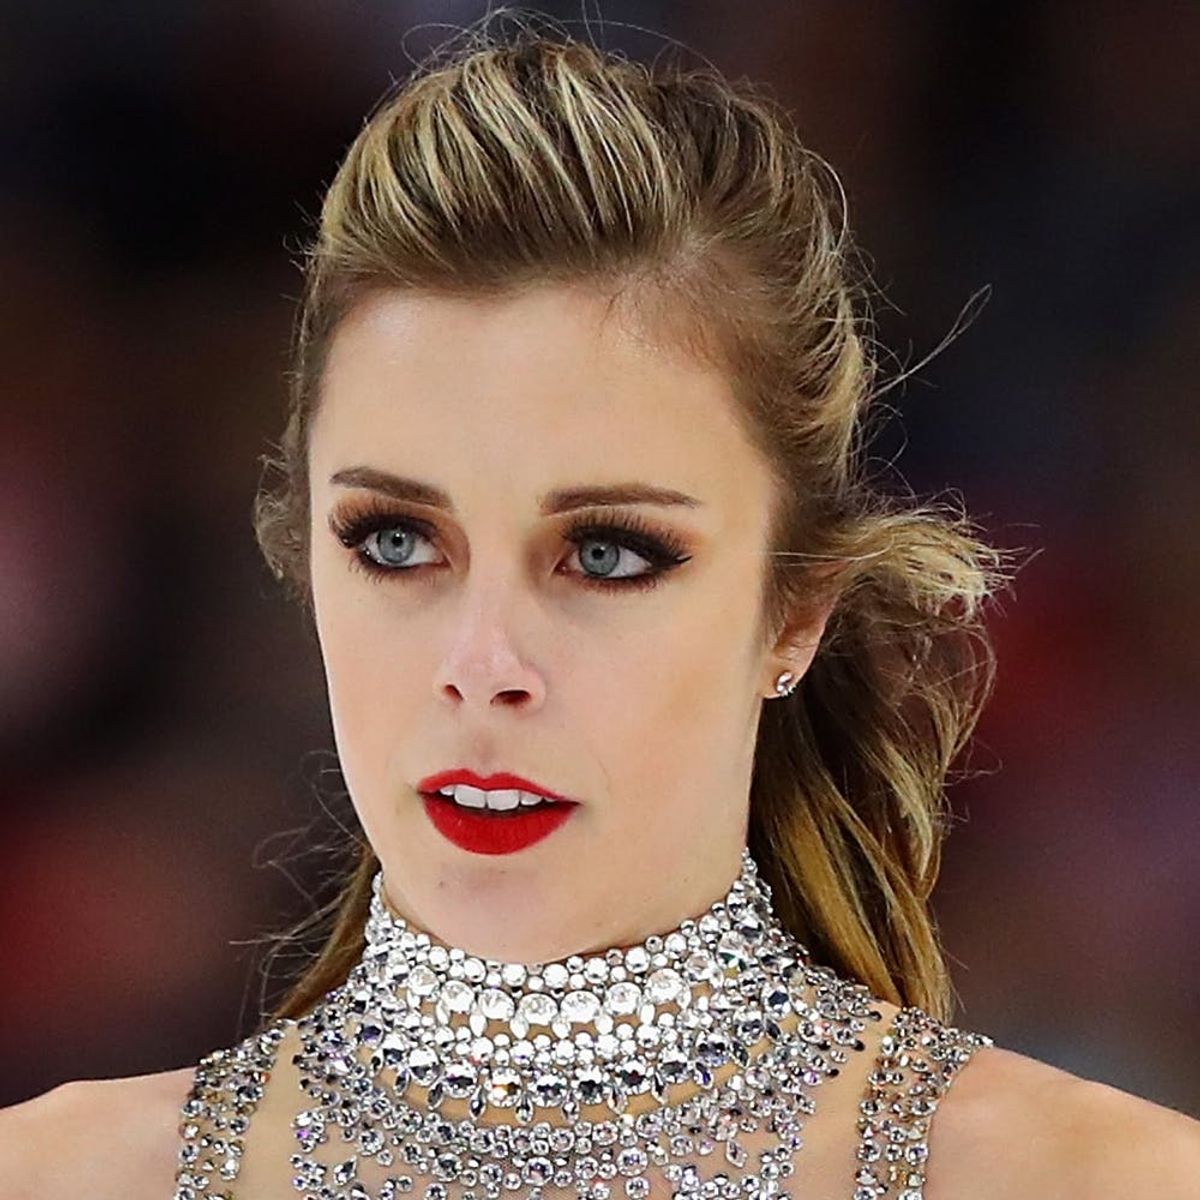 Figure Skater Ashley Wagner Had Some Harsh Words for Judges Prior to Being Cut from the 2018 Olympics Team